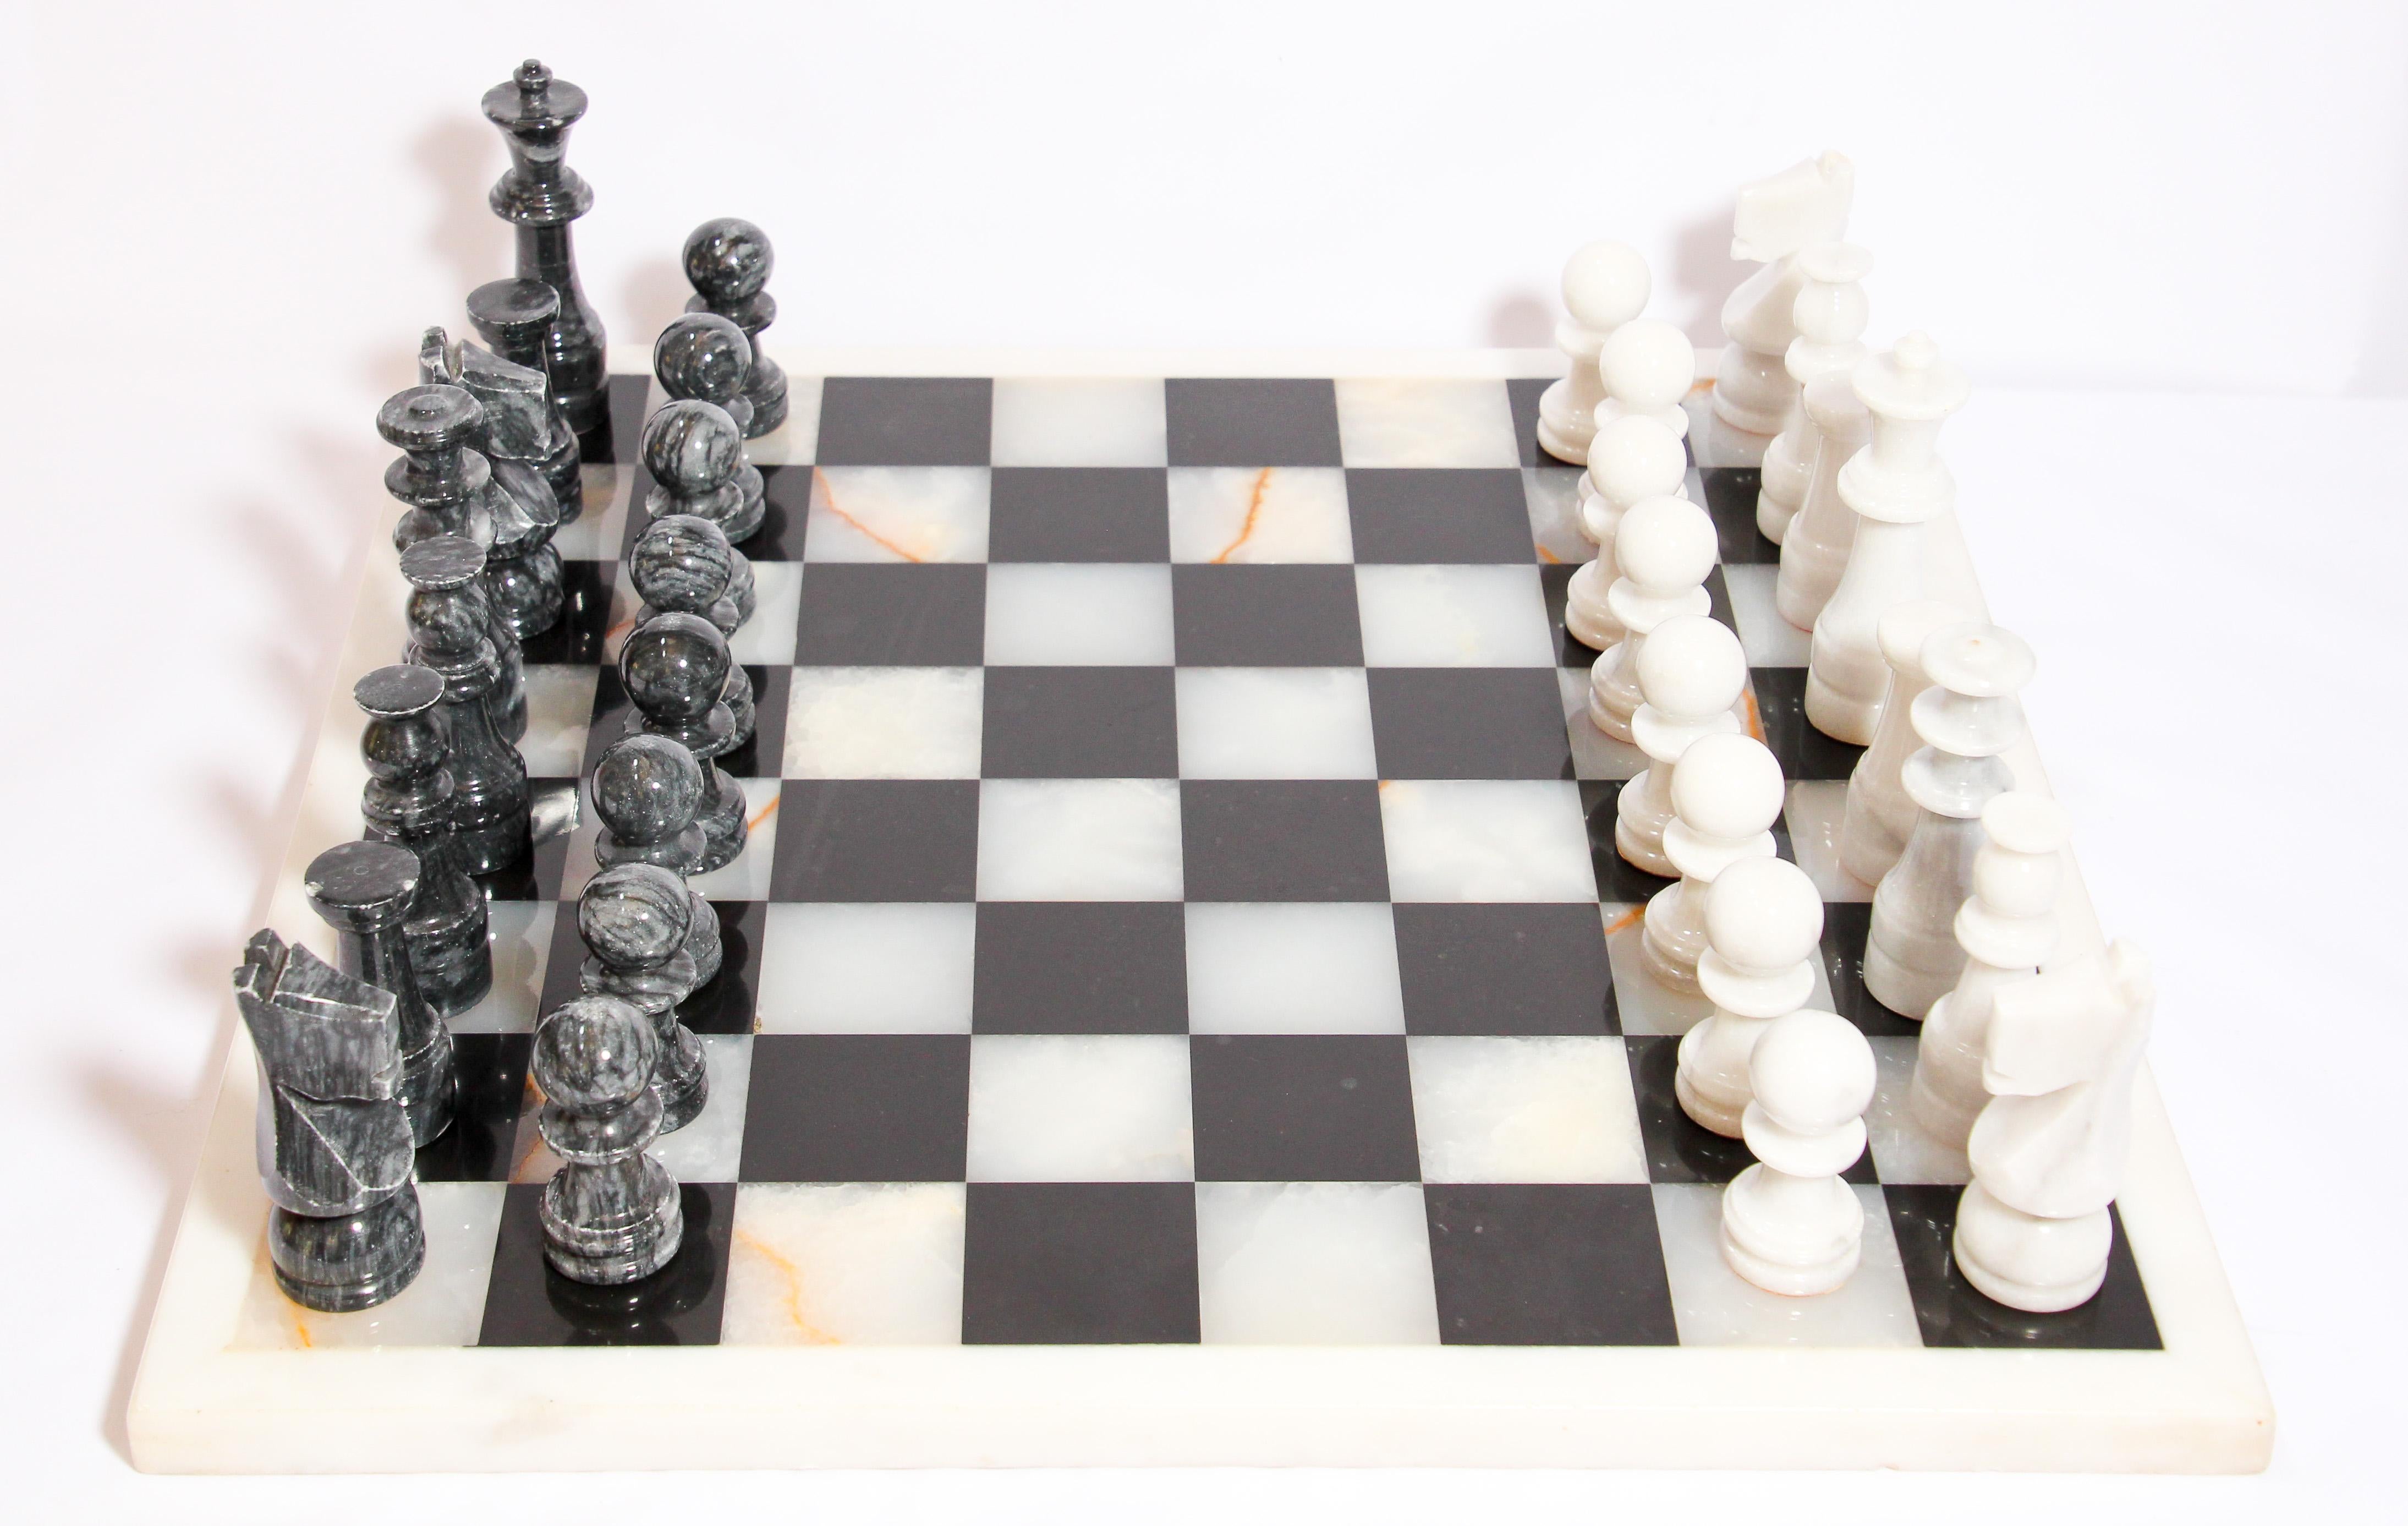 Vintage large heavy marble chess set complete board in white and black with chess set with elaborately onyx hand carved chess pieces with fine decoration.
Measures: The king stands 4.5” tall, smaller pieces are 2